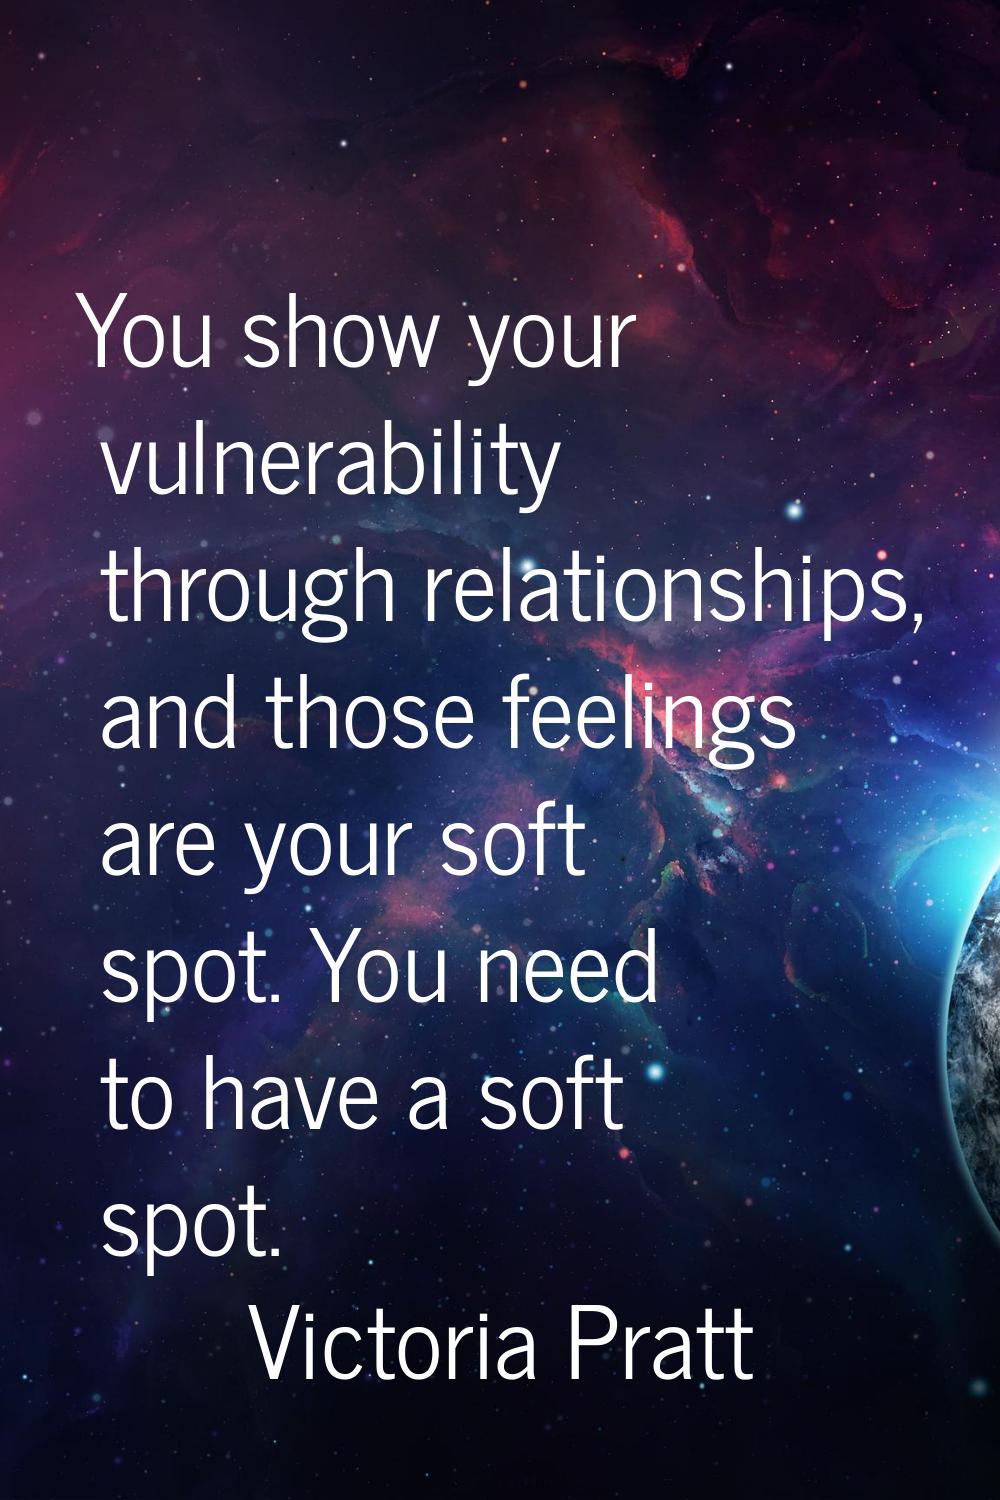 You show your vulnerability through relationships, and those feelings are your soft spot. You need 